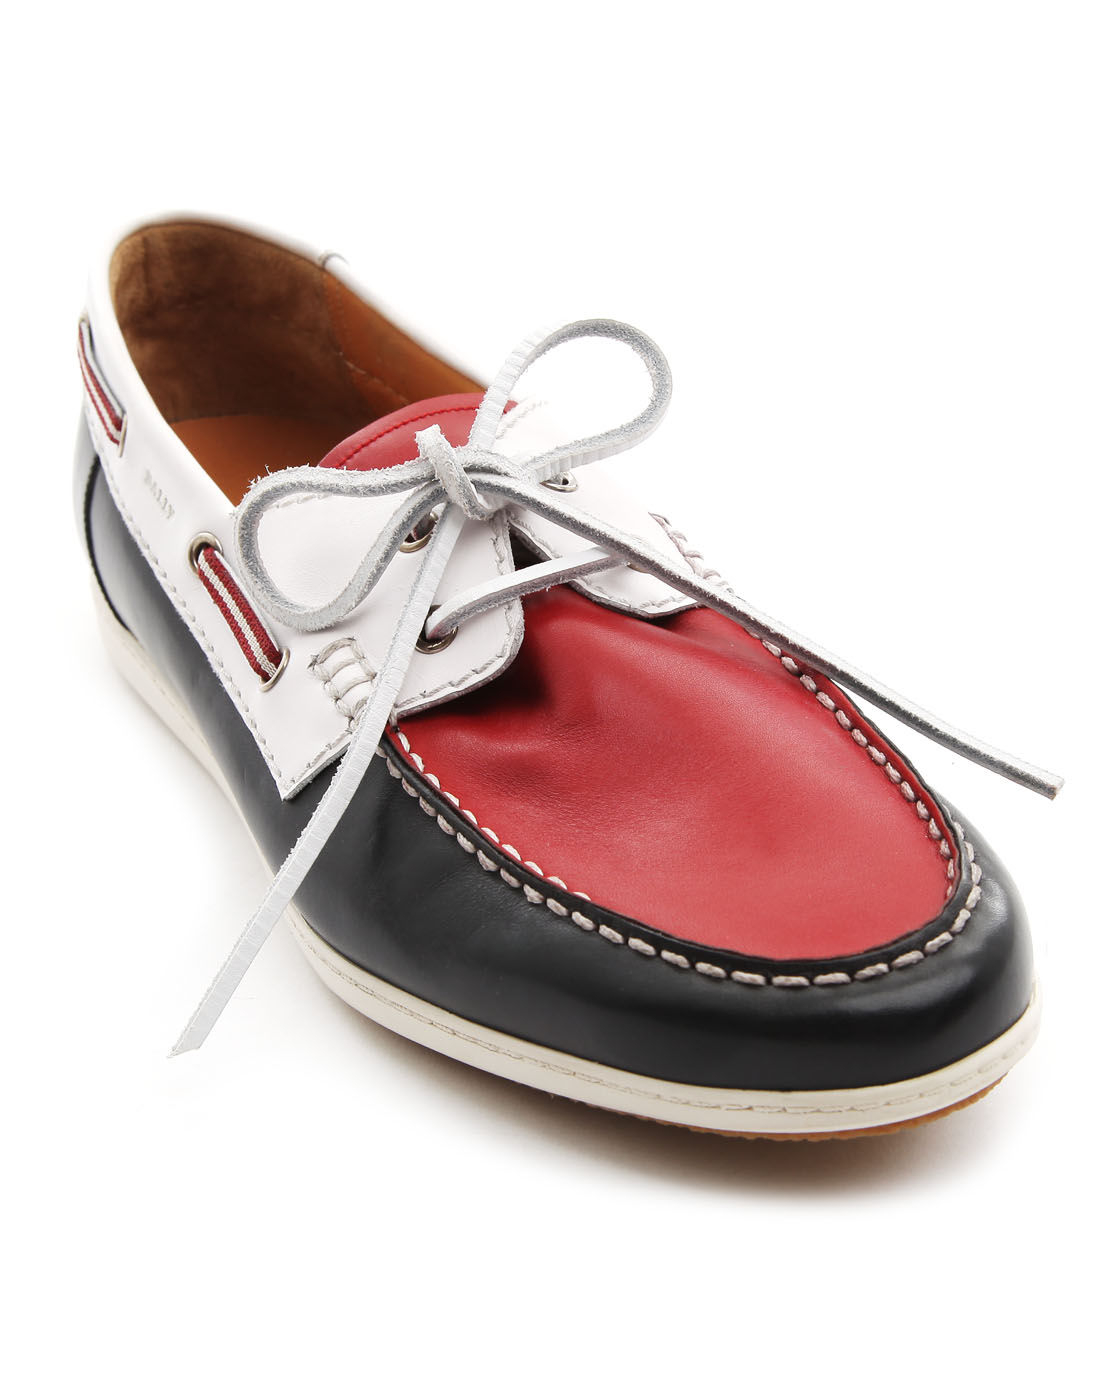 Bally Udal Red White and Blue Leather Boat Shoes in Blue